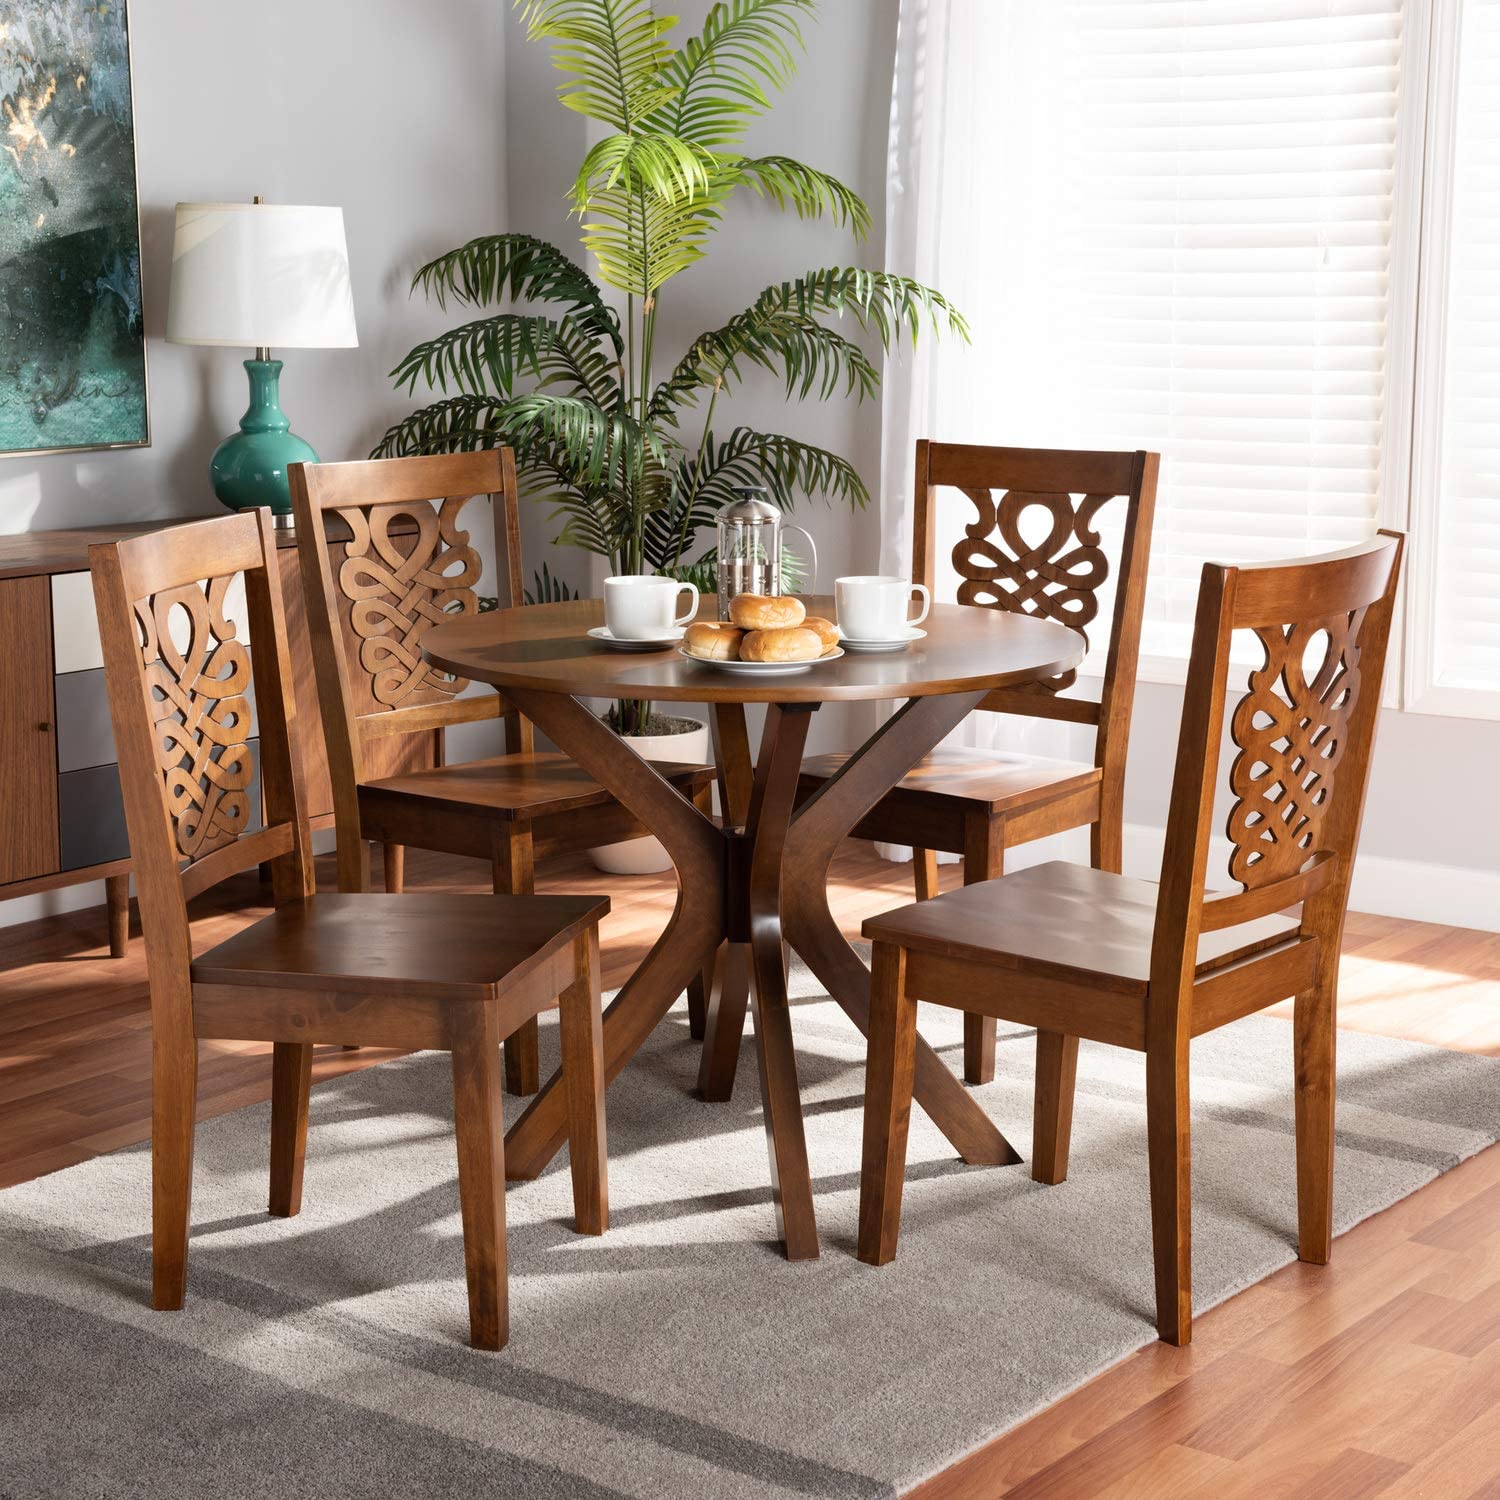 Baxton Studio Liese Modern and Contemporary Transitional Walnut Brown Finished Wood 5-Piece Dining Set